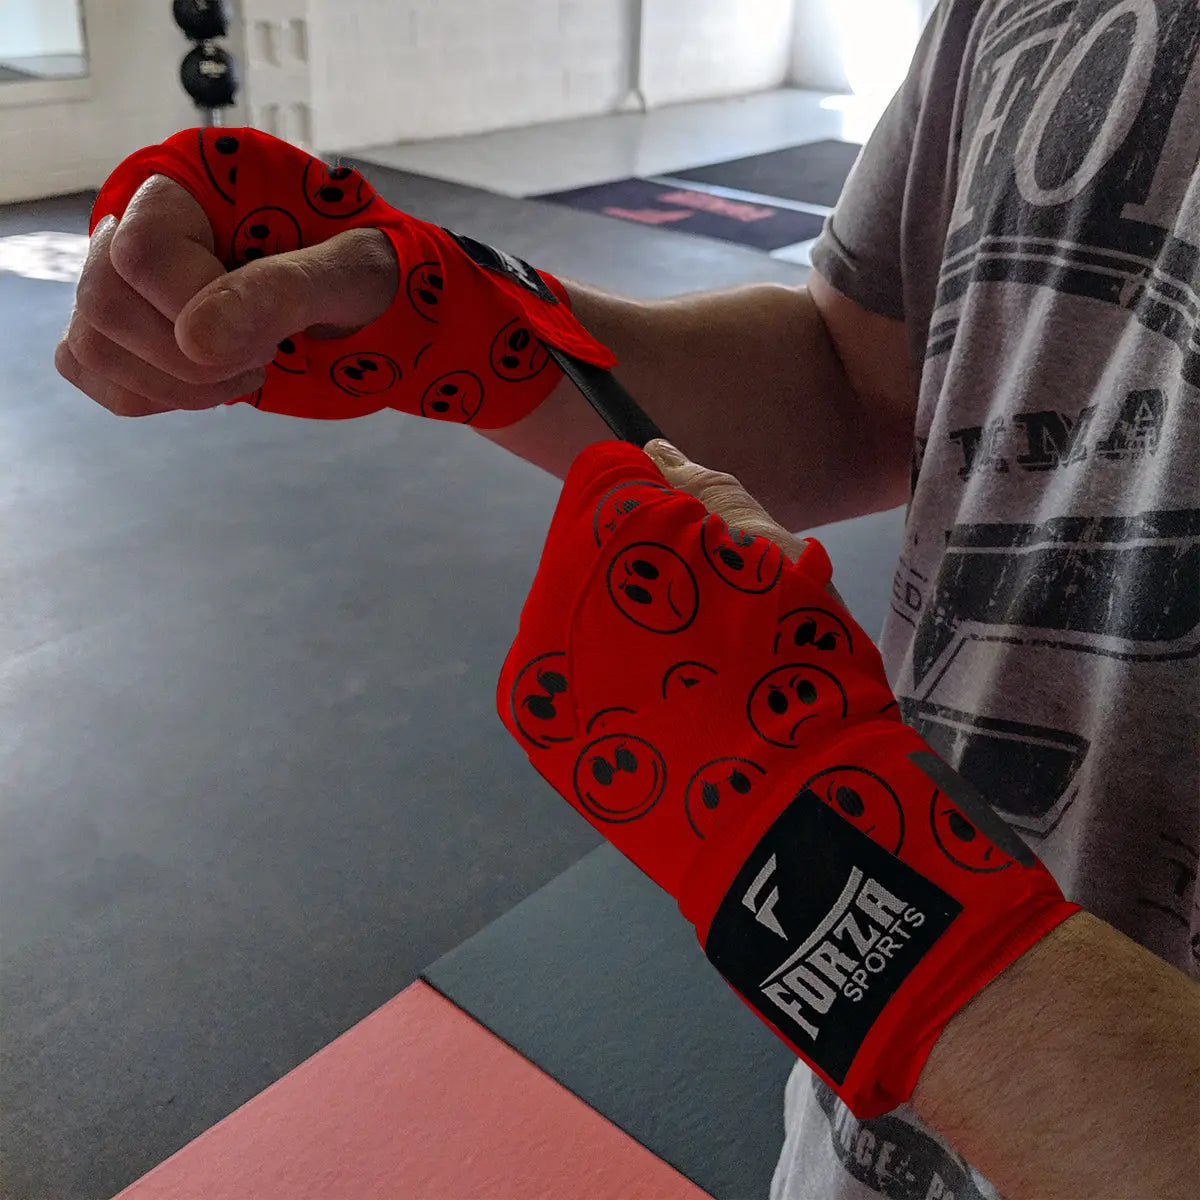 Forza Sports 180" Mexican Style Boxing and MMA Handwraps